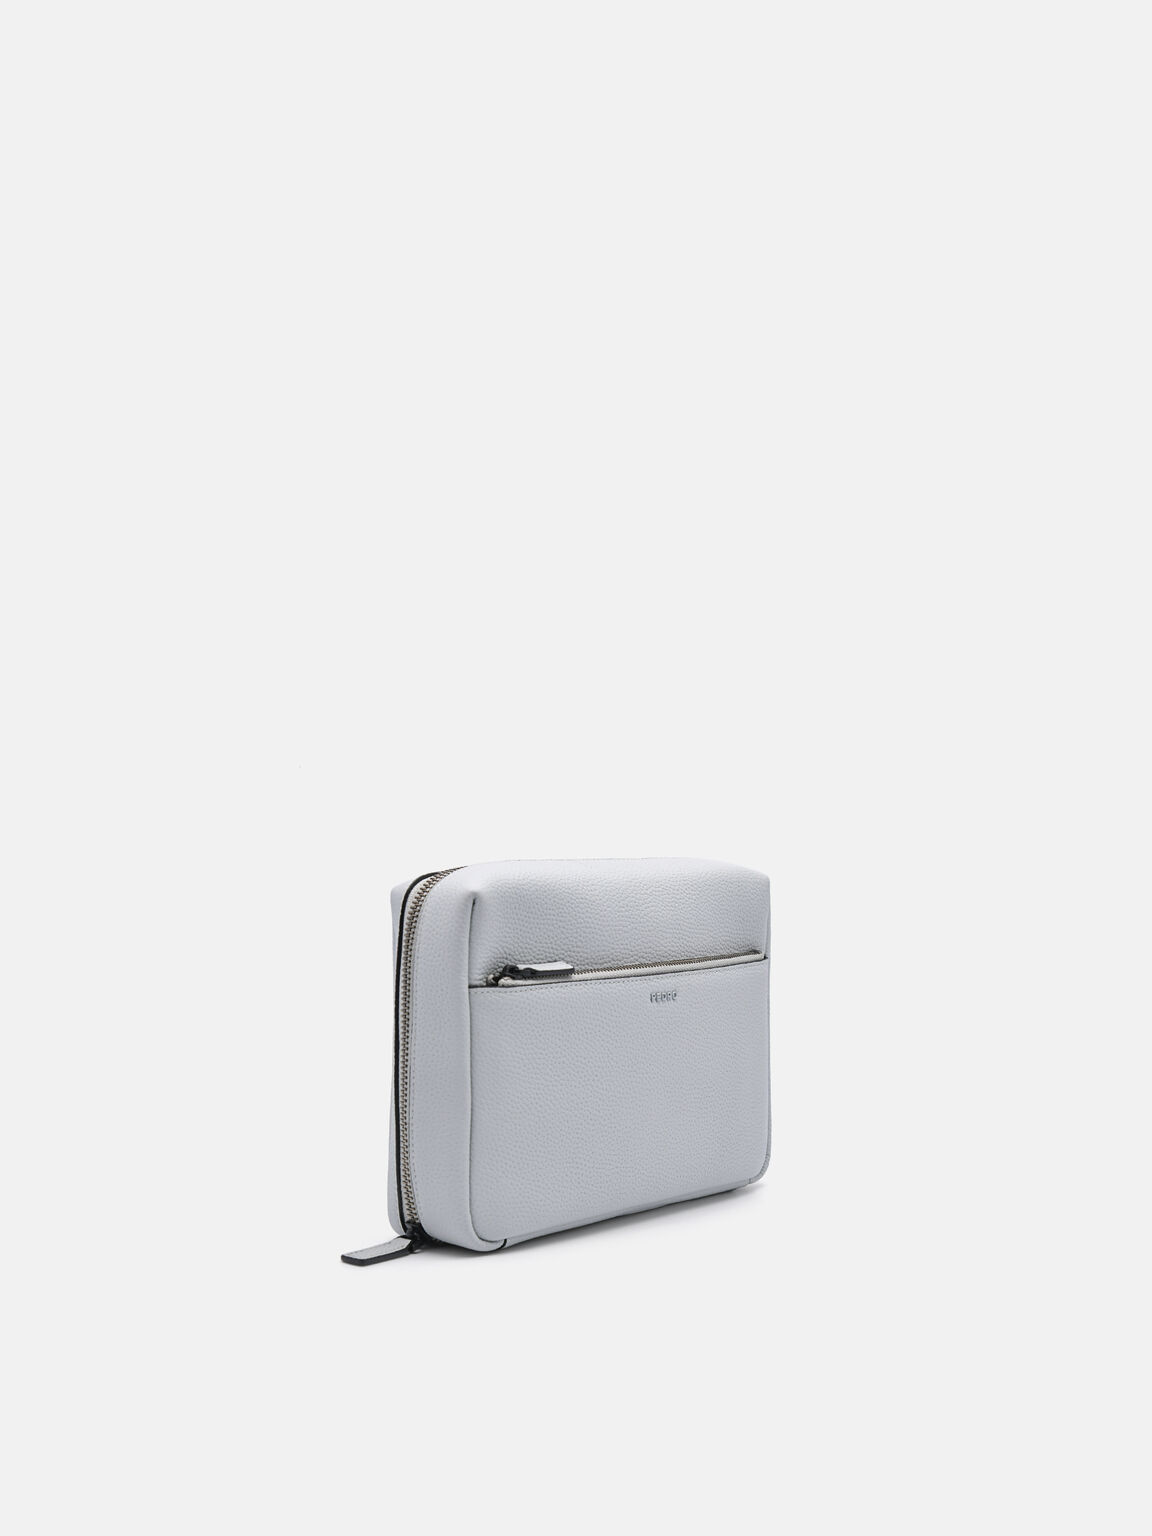 Embossed Leather Pouch, Light Grey, hi-res